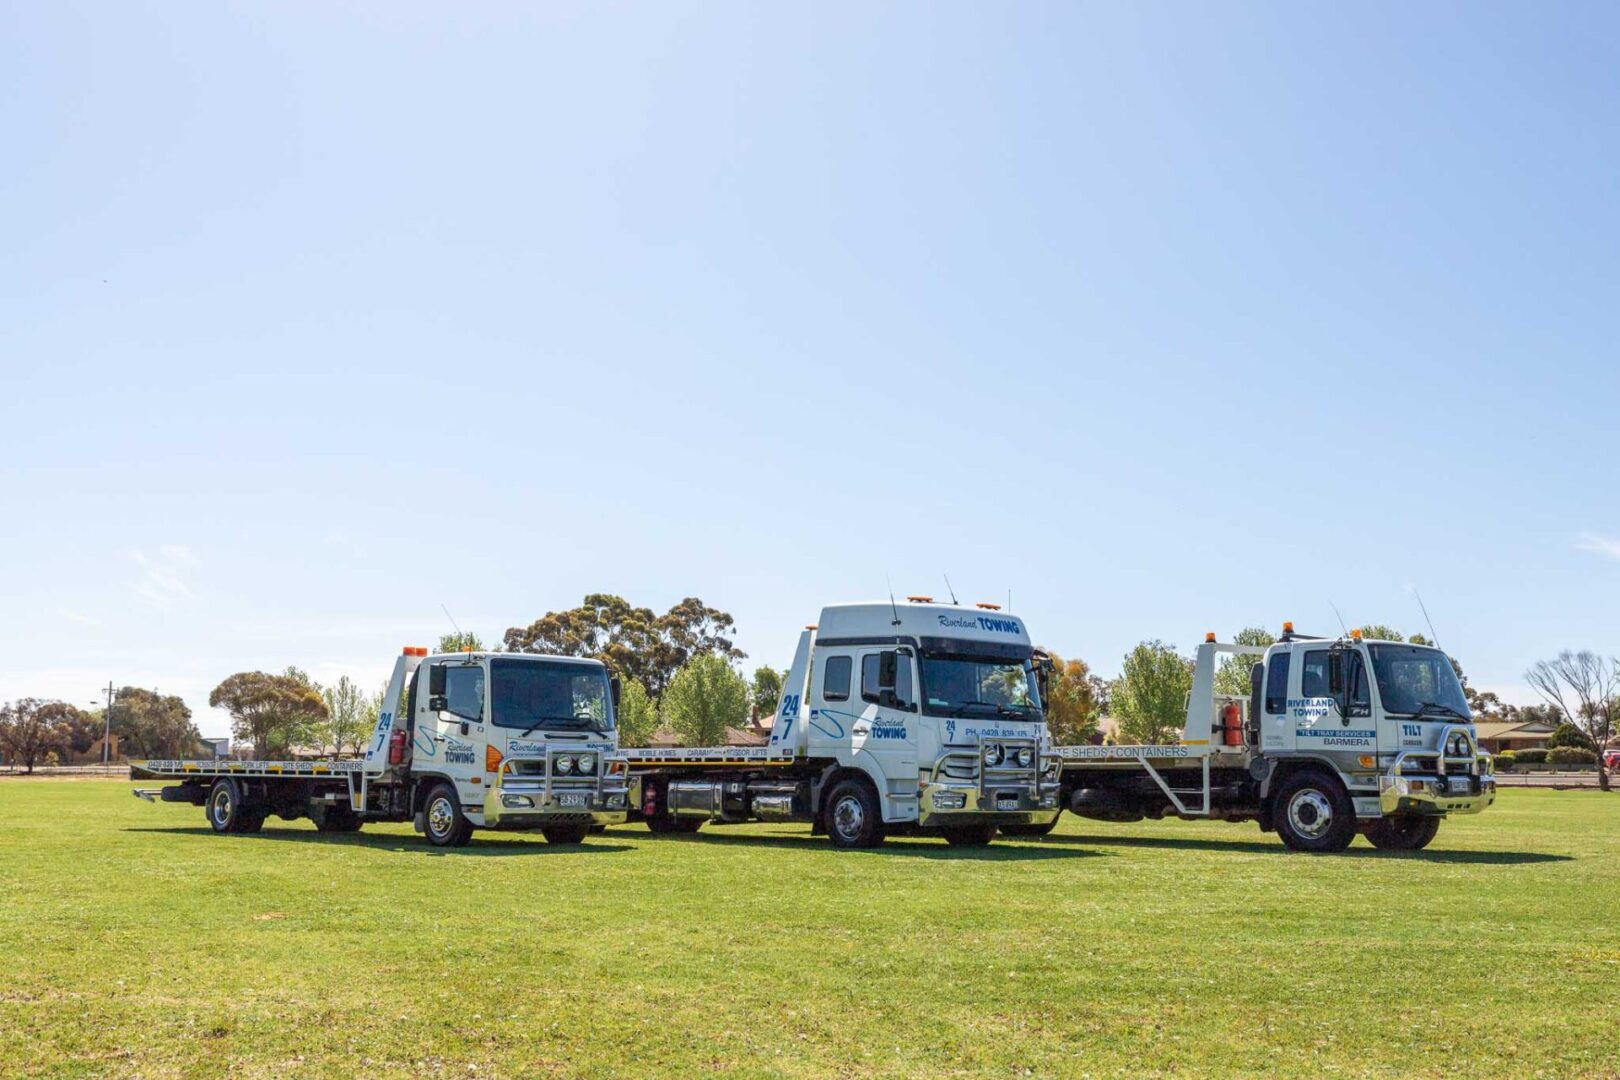 towing business, tilt tray, truck towing, car towing, Riverland